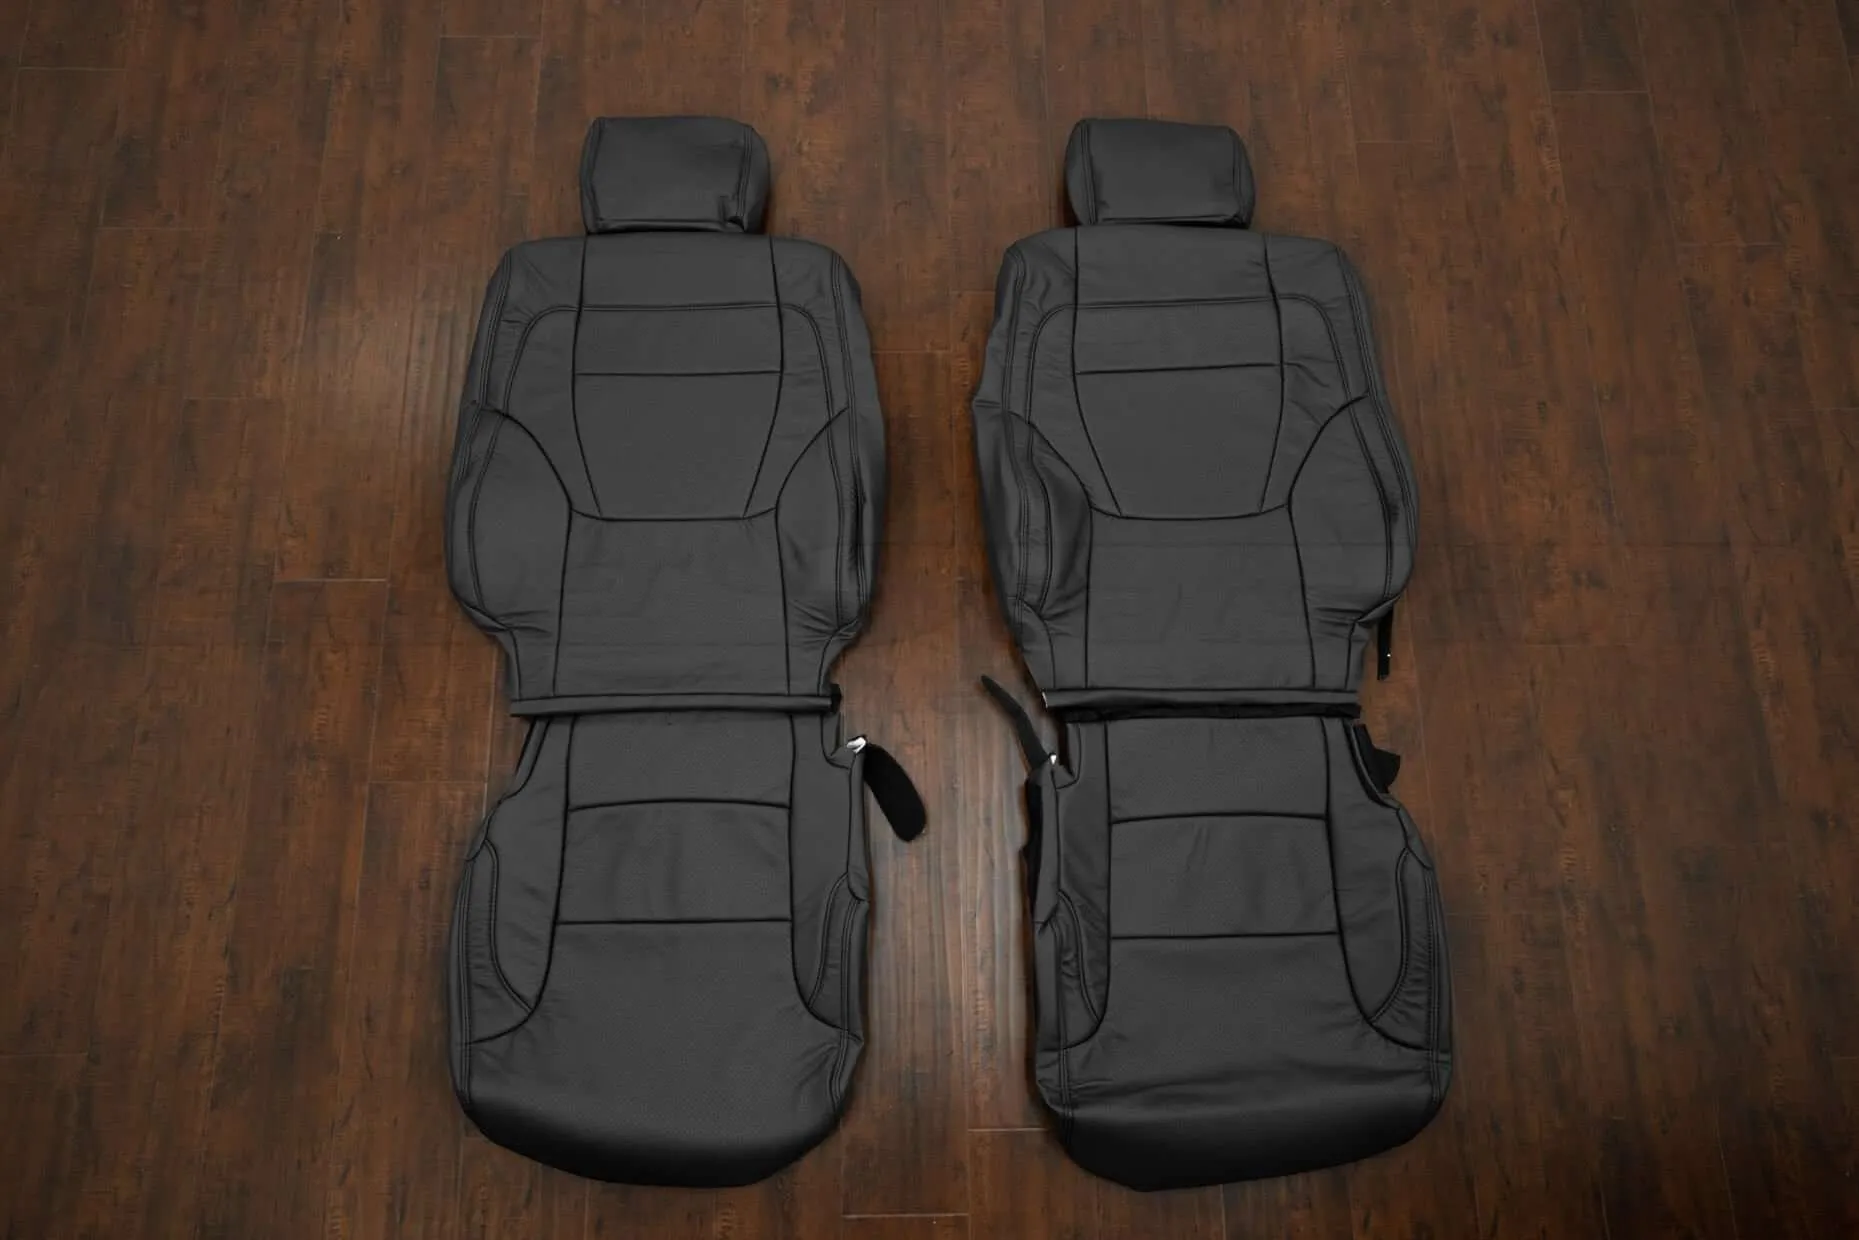 2022 Toyota Tundra CrewMax leather seat kit - dark Graphite - Front sat upholstery